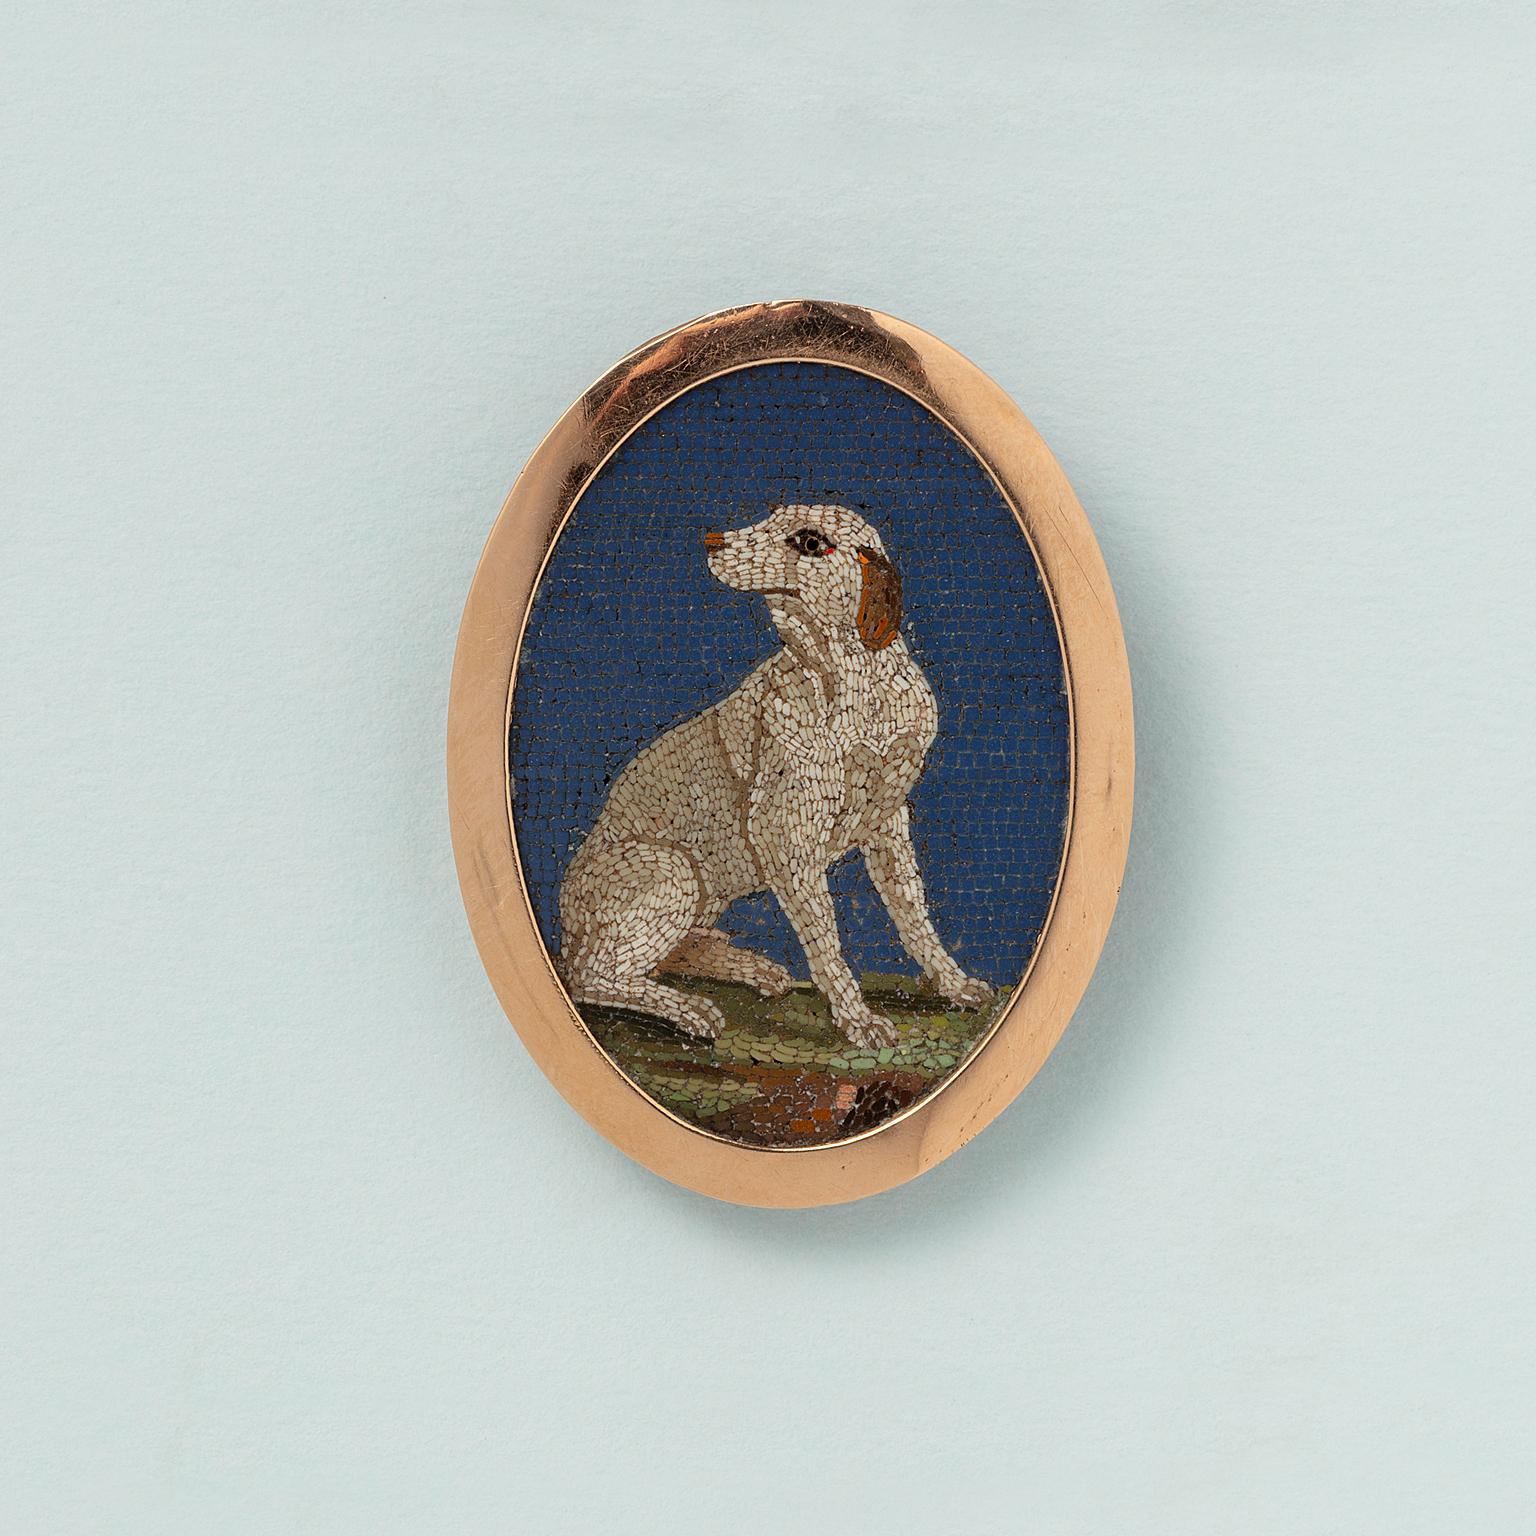 An oval micro mosaic of a dog with a blue background in an 18 carat gold border, with a silver setting which can be either a brooch or a stand, Rome, circa 1800.

weight: 9.4 gram
dimensions with border: 4.5 x 3 cm
dimensions micro mosaic: 4 x 2.7 cm